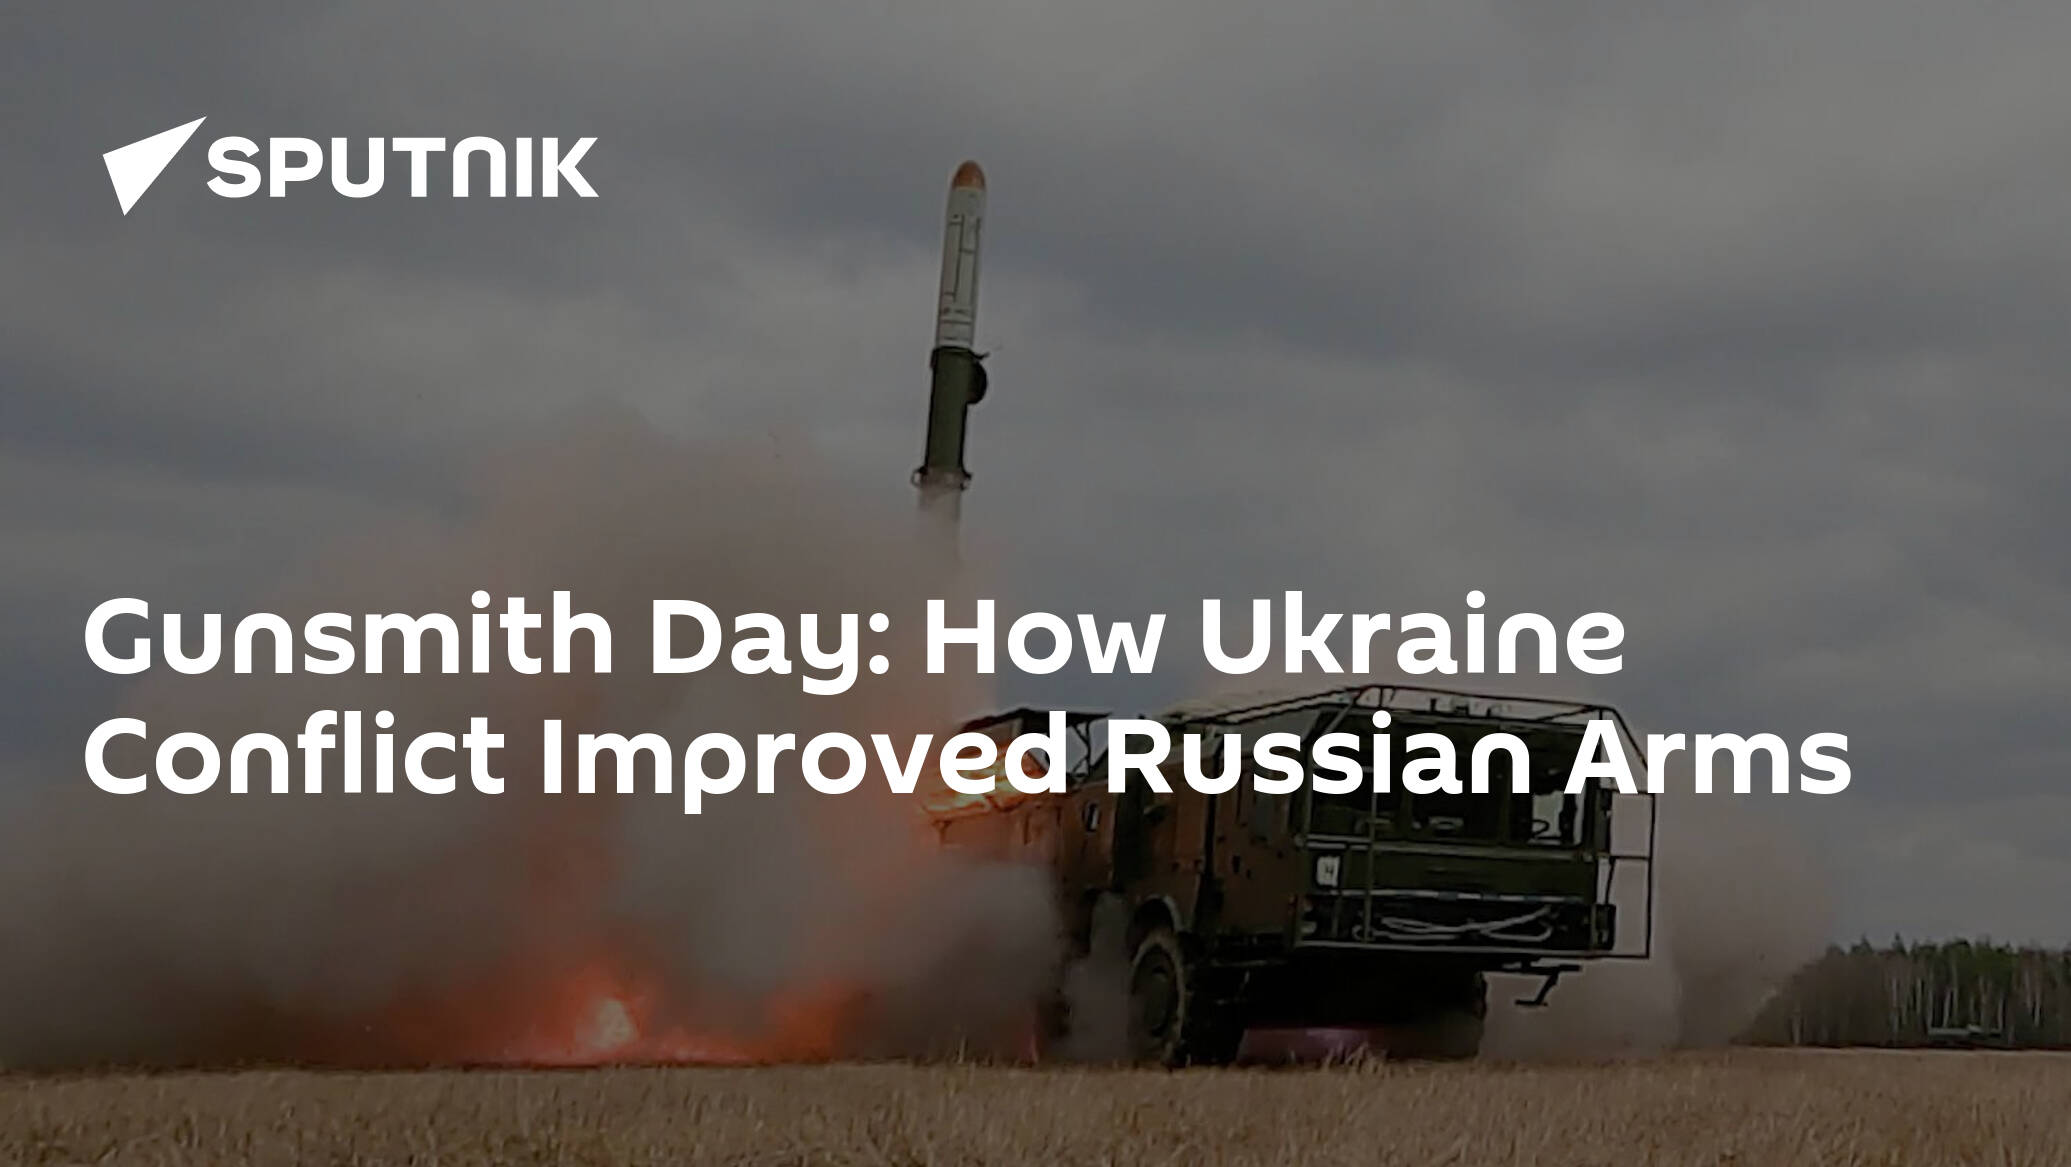 Gunsmith Day: How Ukraine Conflict Improved Russian Arms